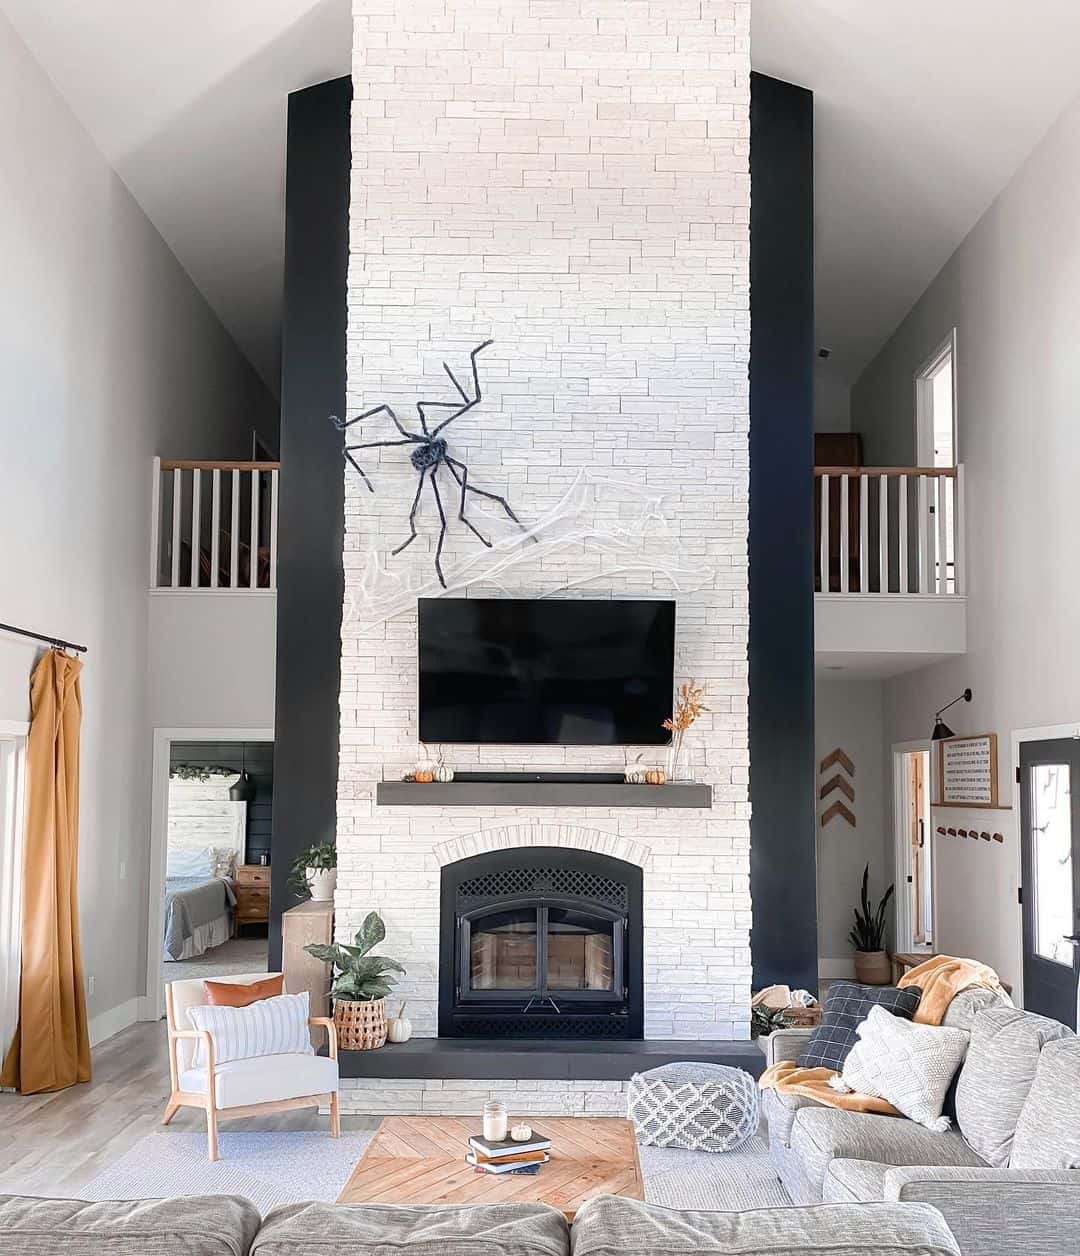 Spooky Fireplace with Spider Web Decor